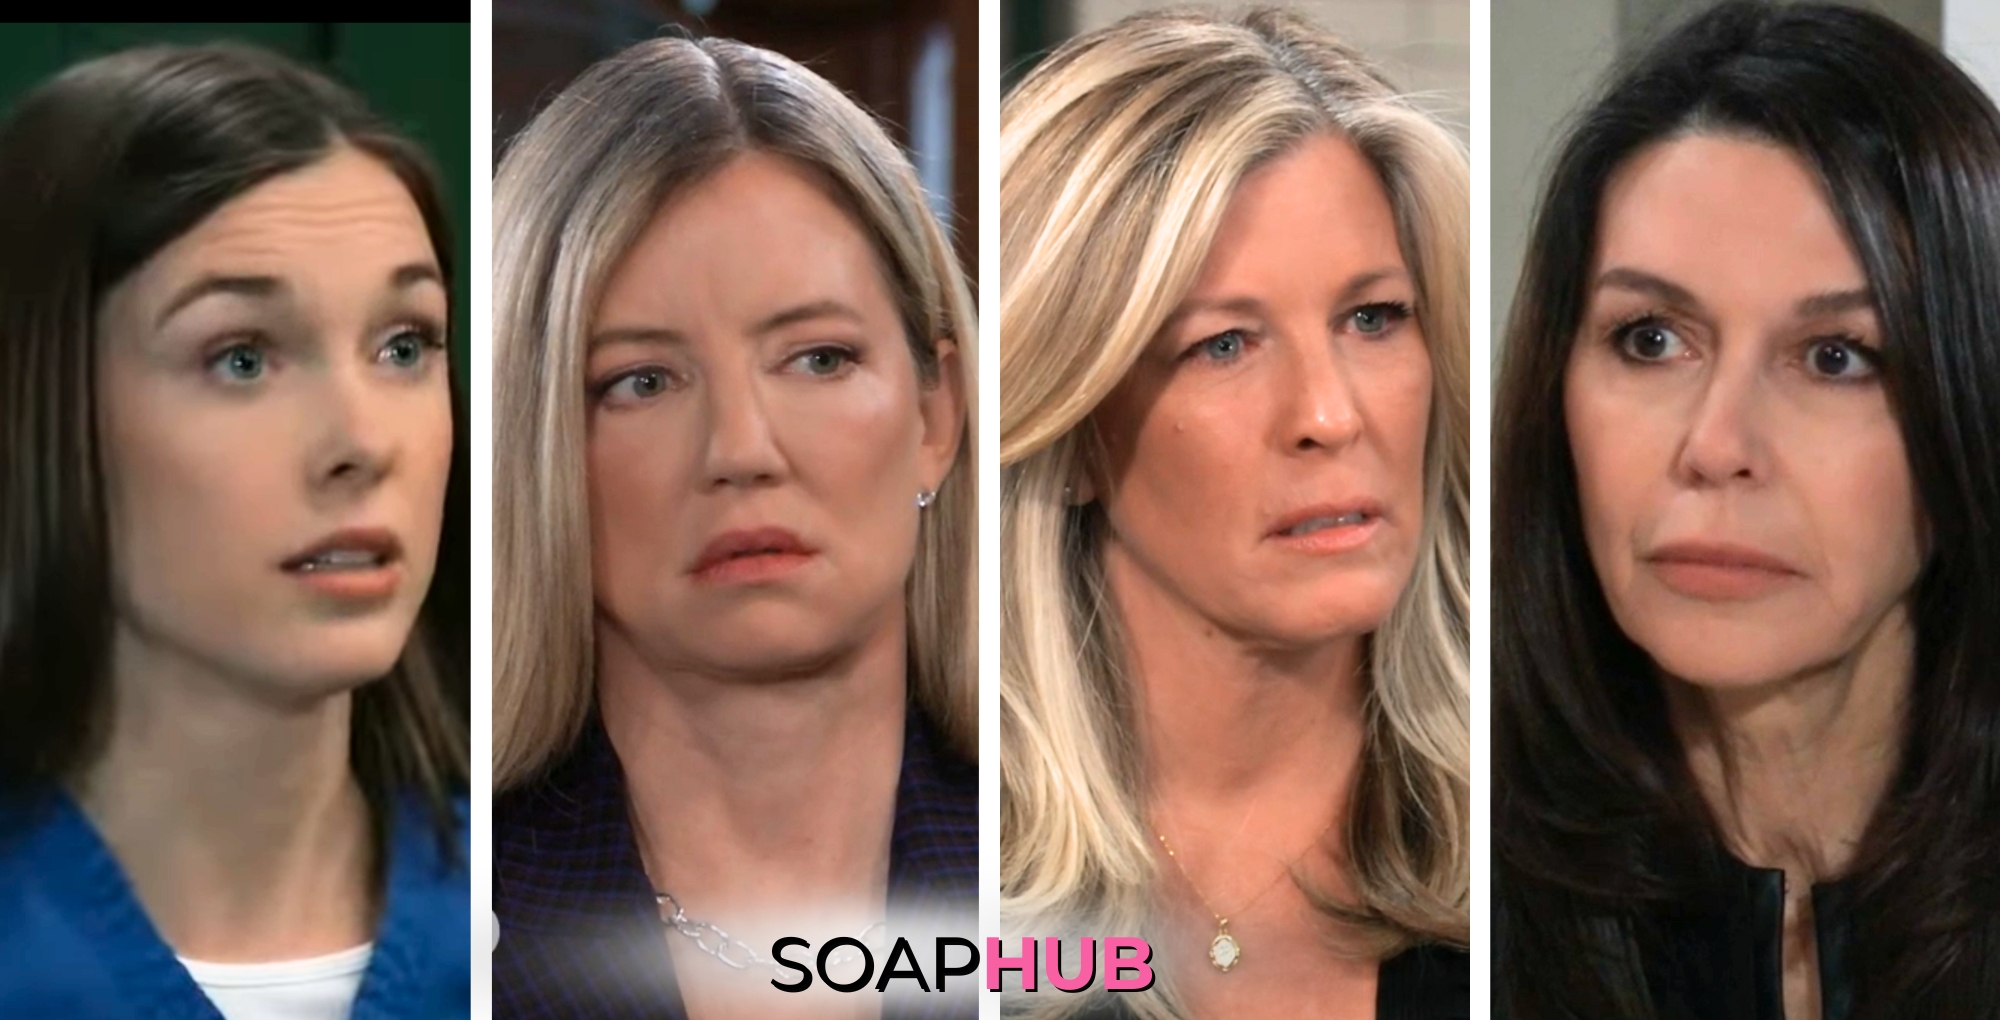 On General Hospital, the May 13 spoilers focus on Willow, Nina, Carly, and Ann with the Soap Hub logo across the bottom.